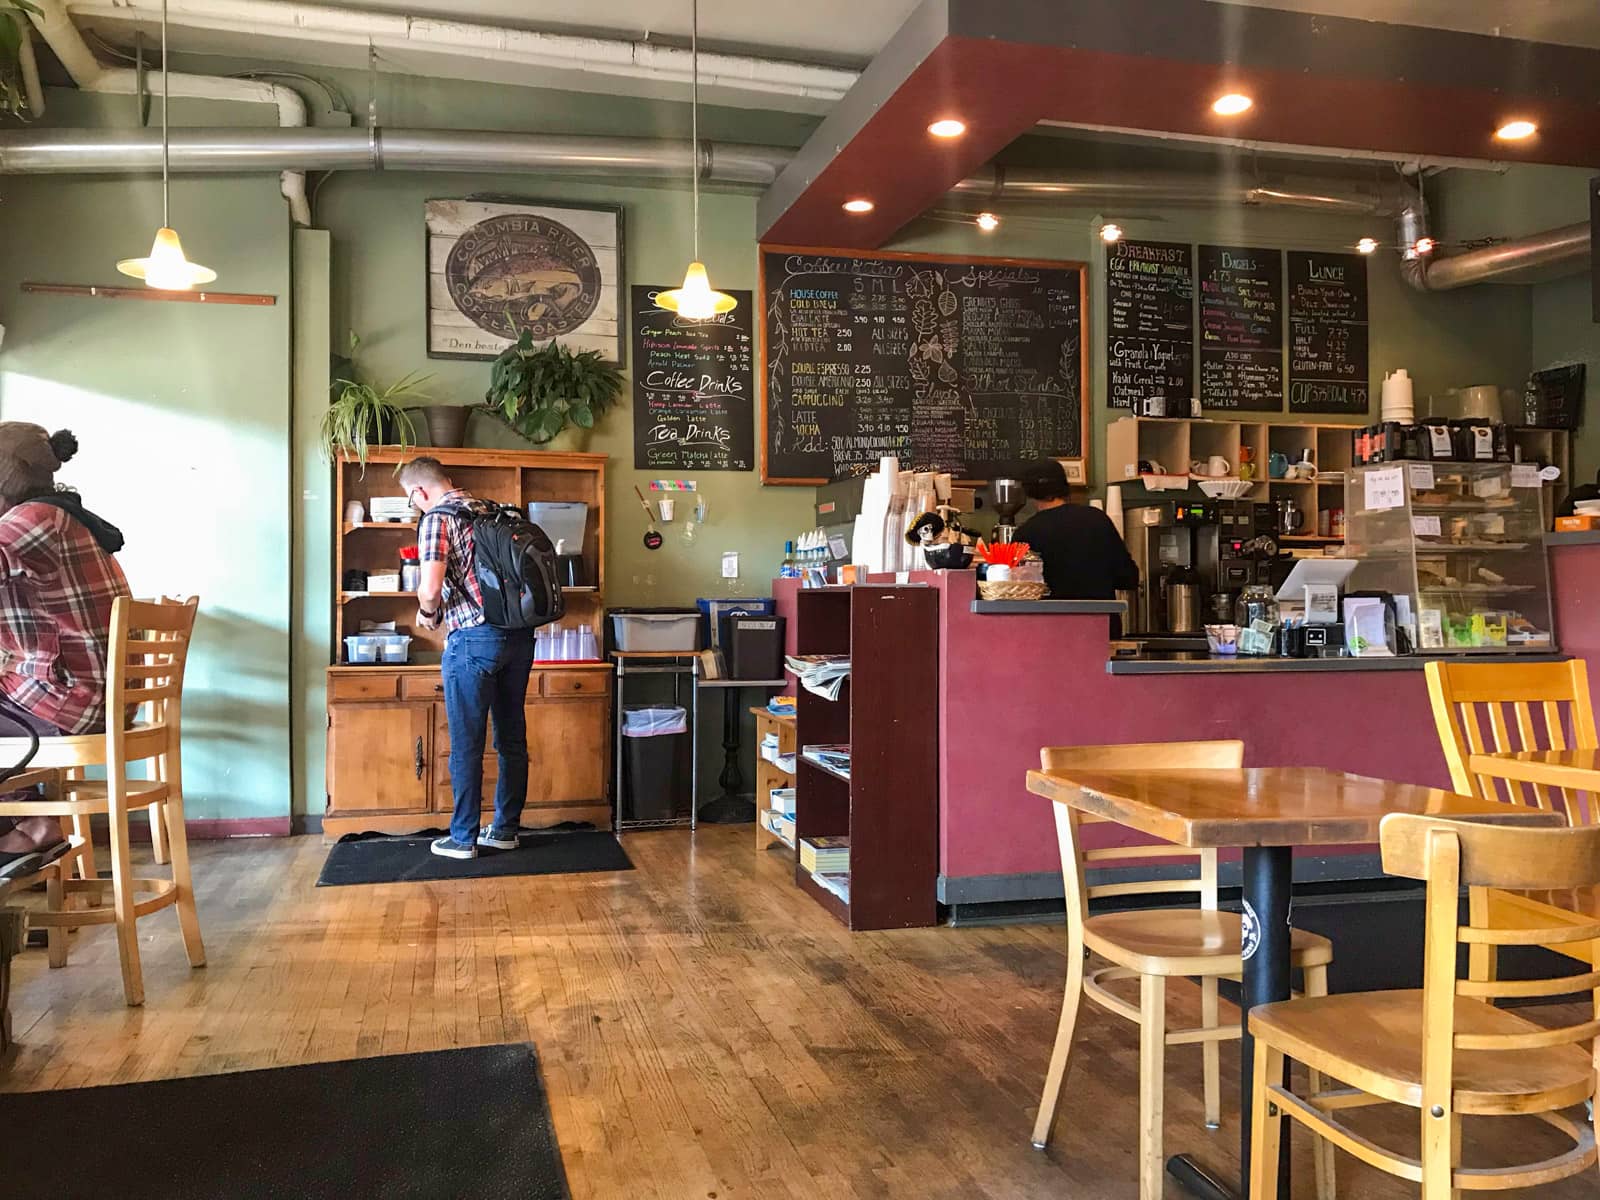 The inside of a coffee shop. The counter can be seen, with chalkboards with handwritten menus. There are only a few people in the cafe and a few empty chairs. The decor is brown and muted and gives a homey vibe.